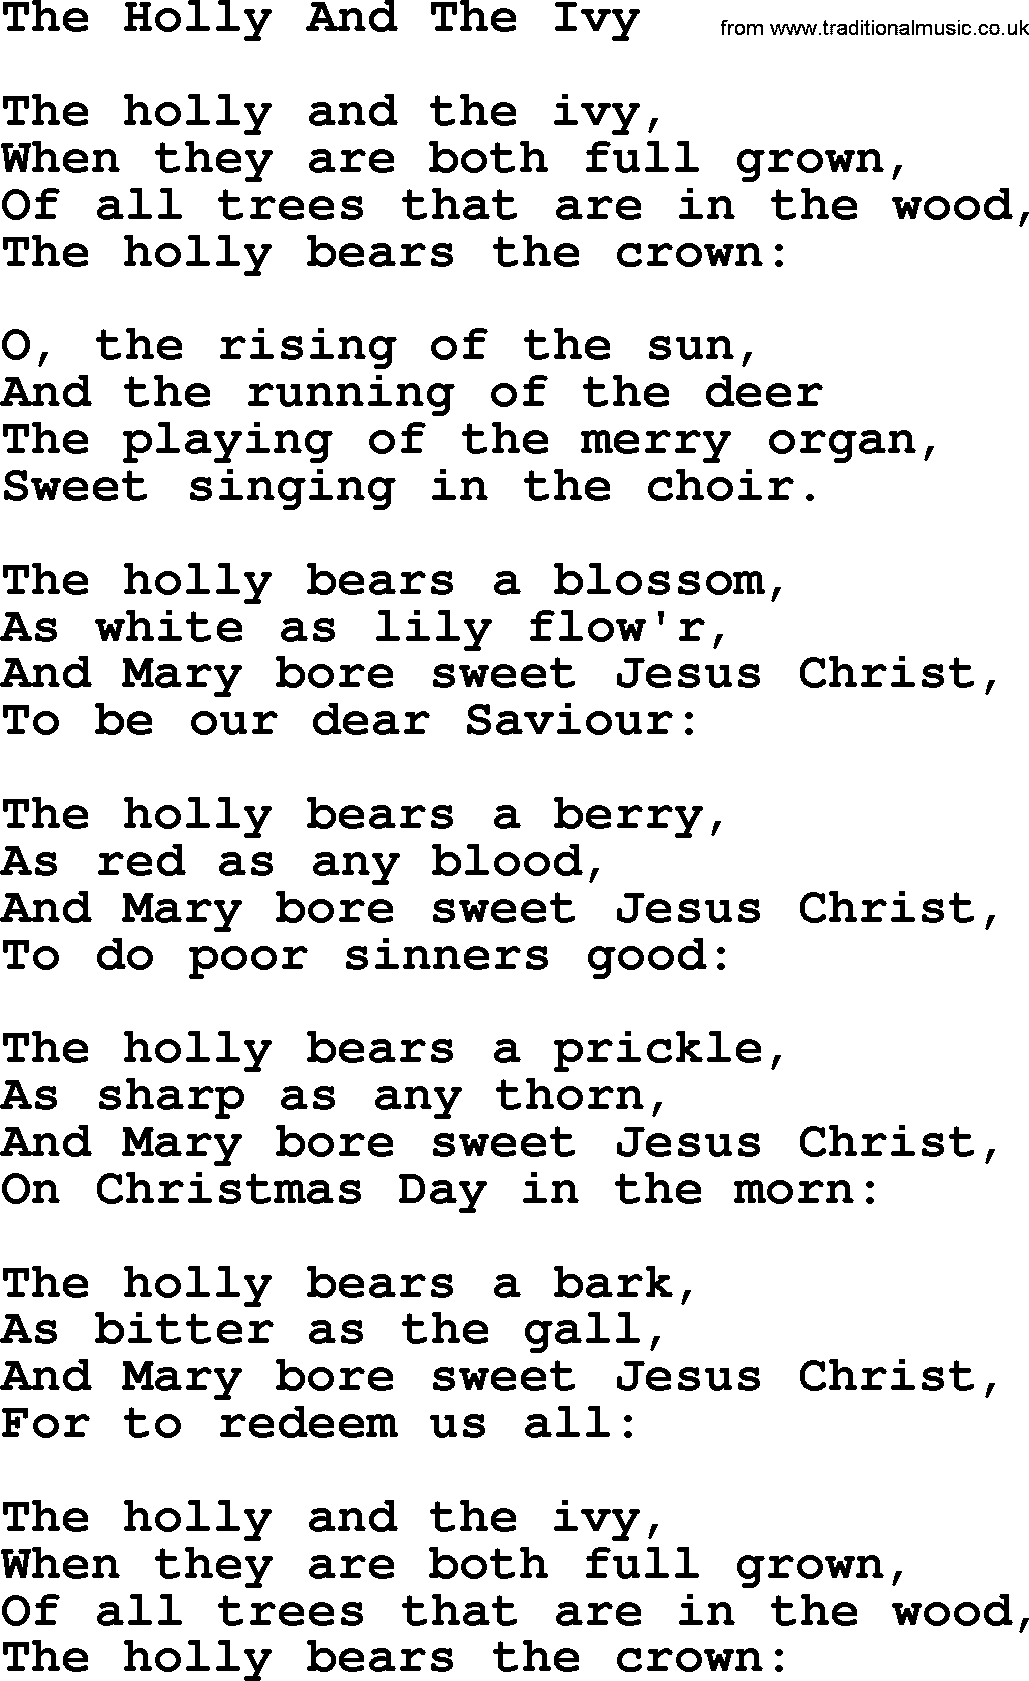 Catholic Hymns, Song: The Holly And The Ivy - lyrics and PDF